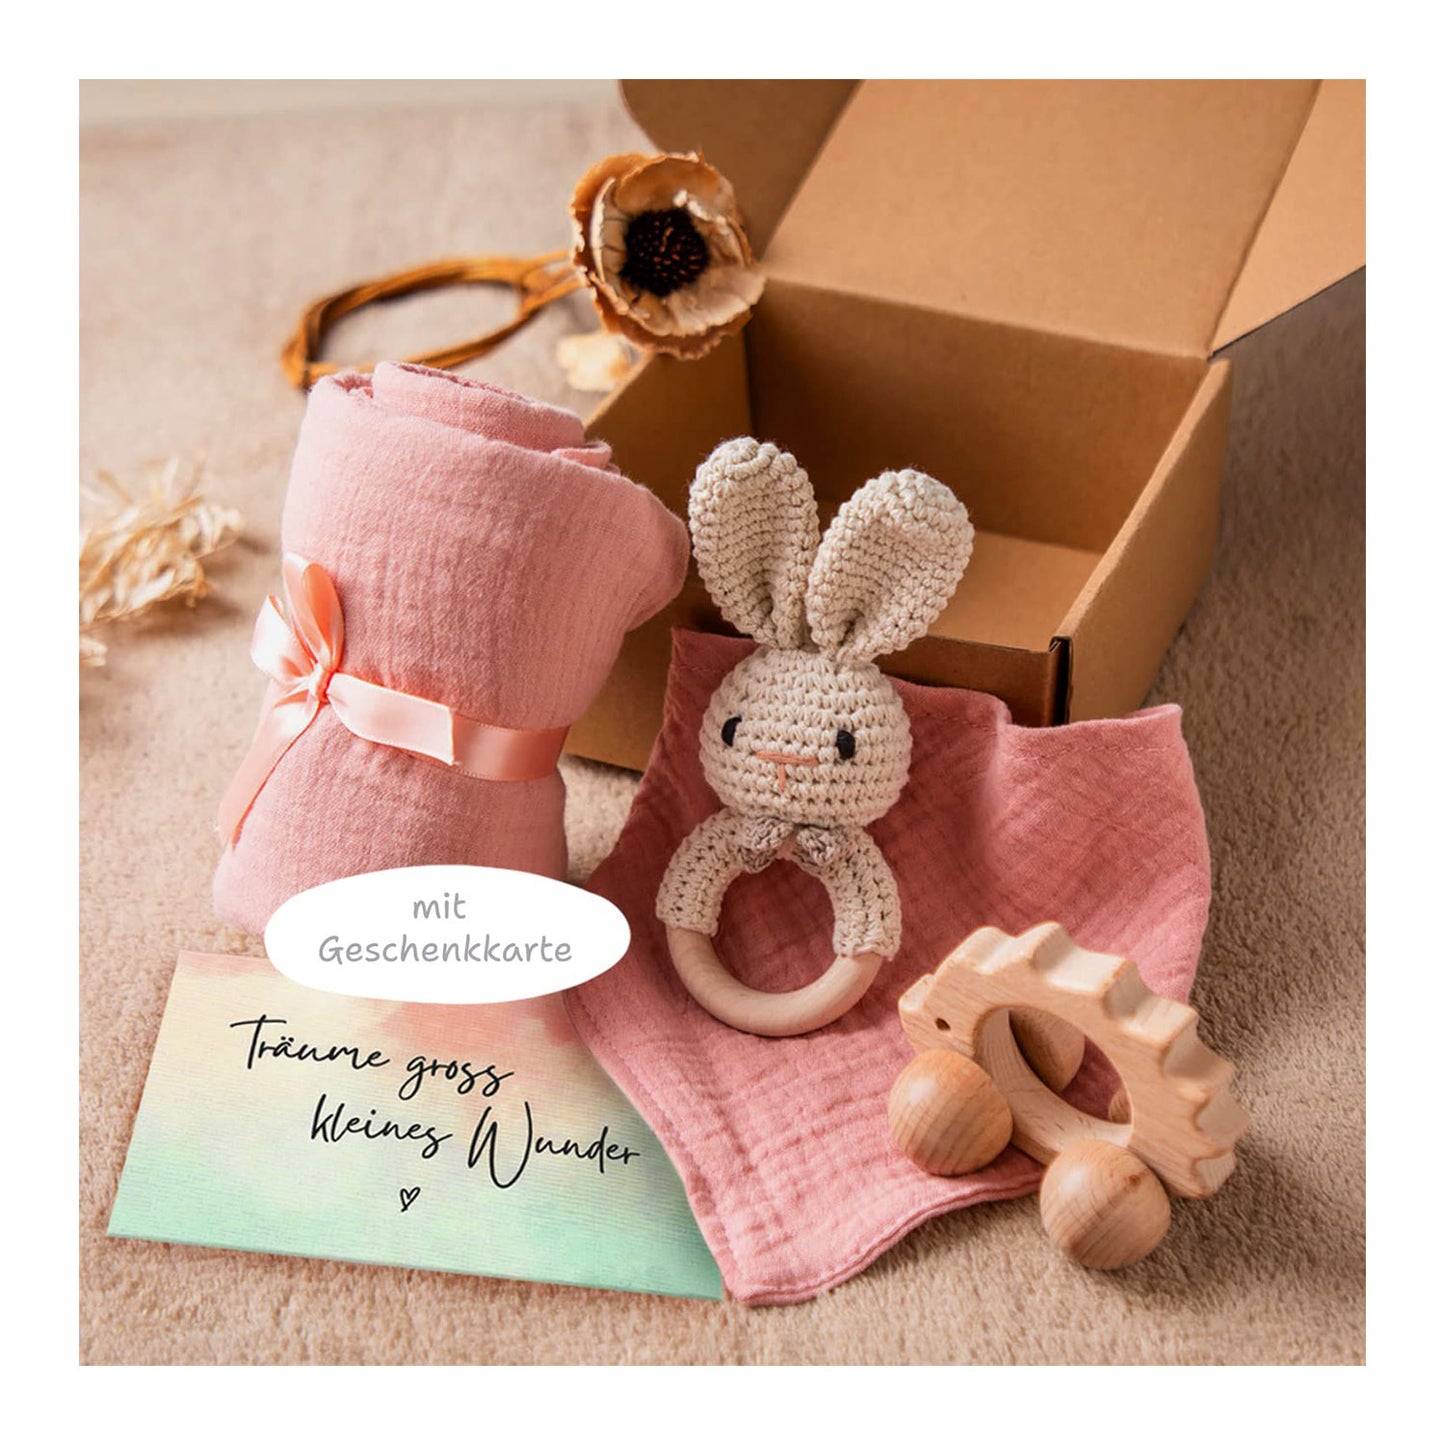 Baby gift set from the brand Baby Storch